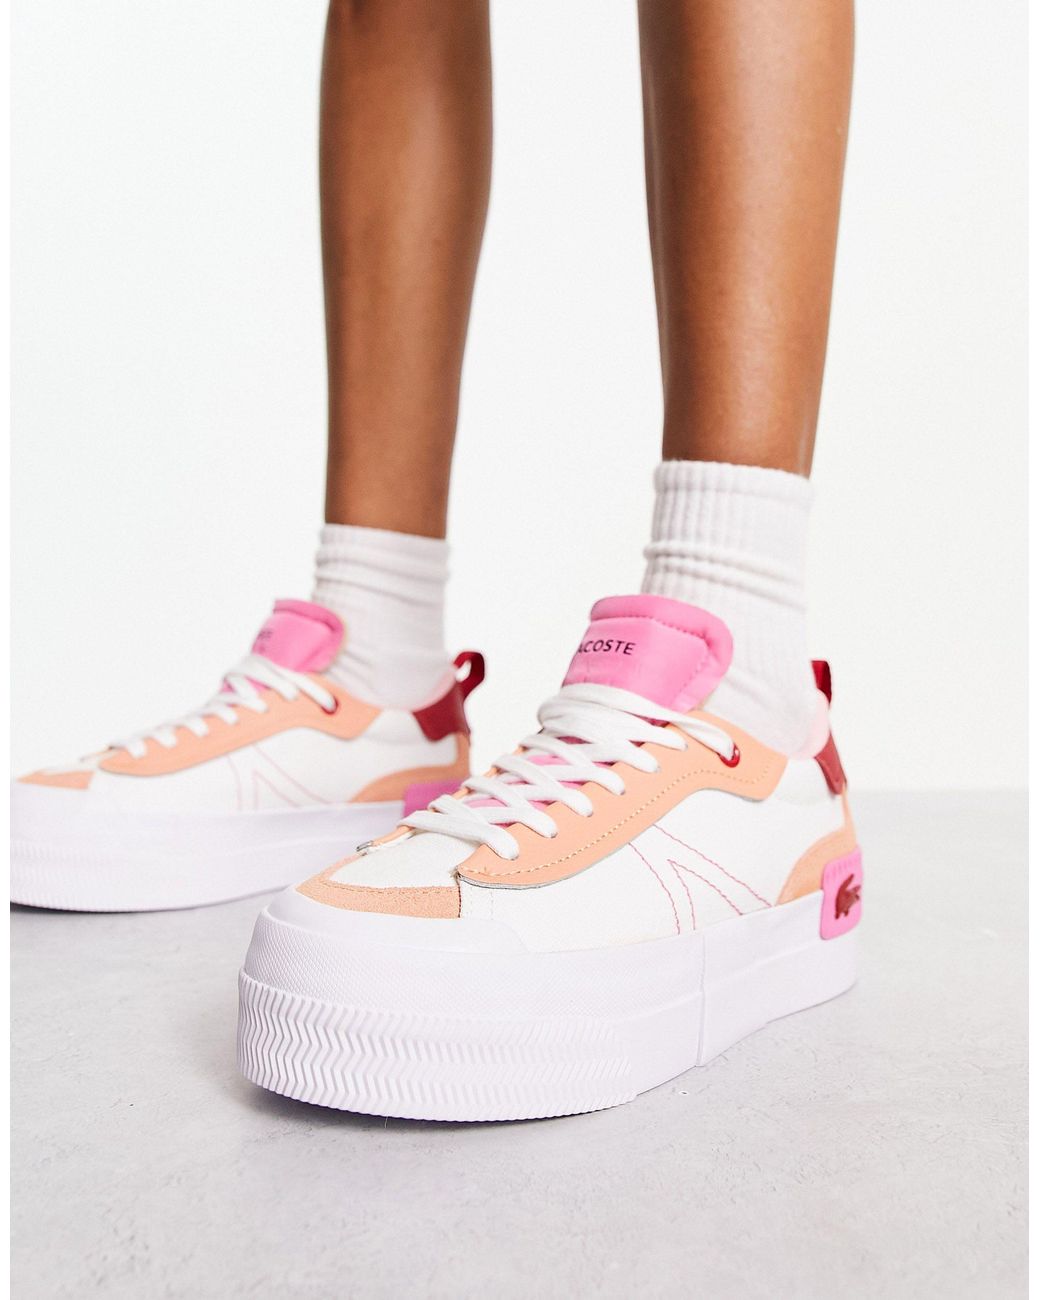 Lacoste L004 platform sneakers in white | ASOS